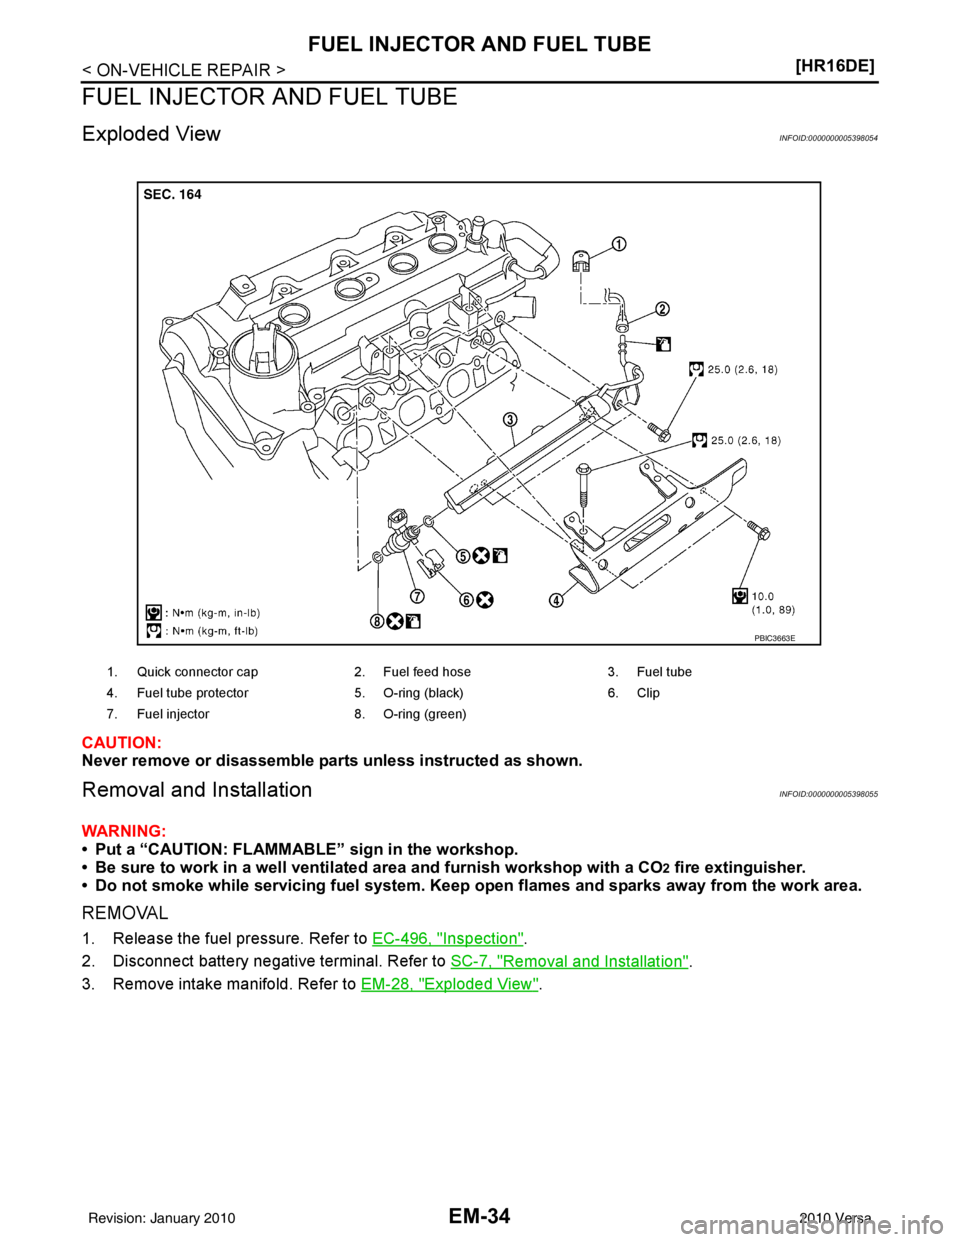 NISSAN TIIDA 2010  Service User Guide EM-34
< ON-VEHICLE REPAIR >[HR16DE]
FUEL INJECTOR AND FUEL TUBE
FUEL INJECTOR AND FUEL TUBE
Exploded ViewINFOID:0000000005398054
CAUTION:
Never remove or disassemble part
s unless instructed as shown.